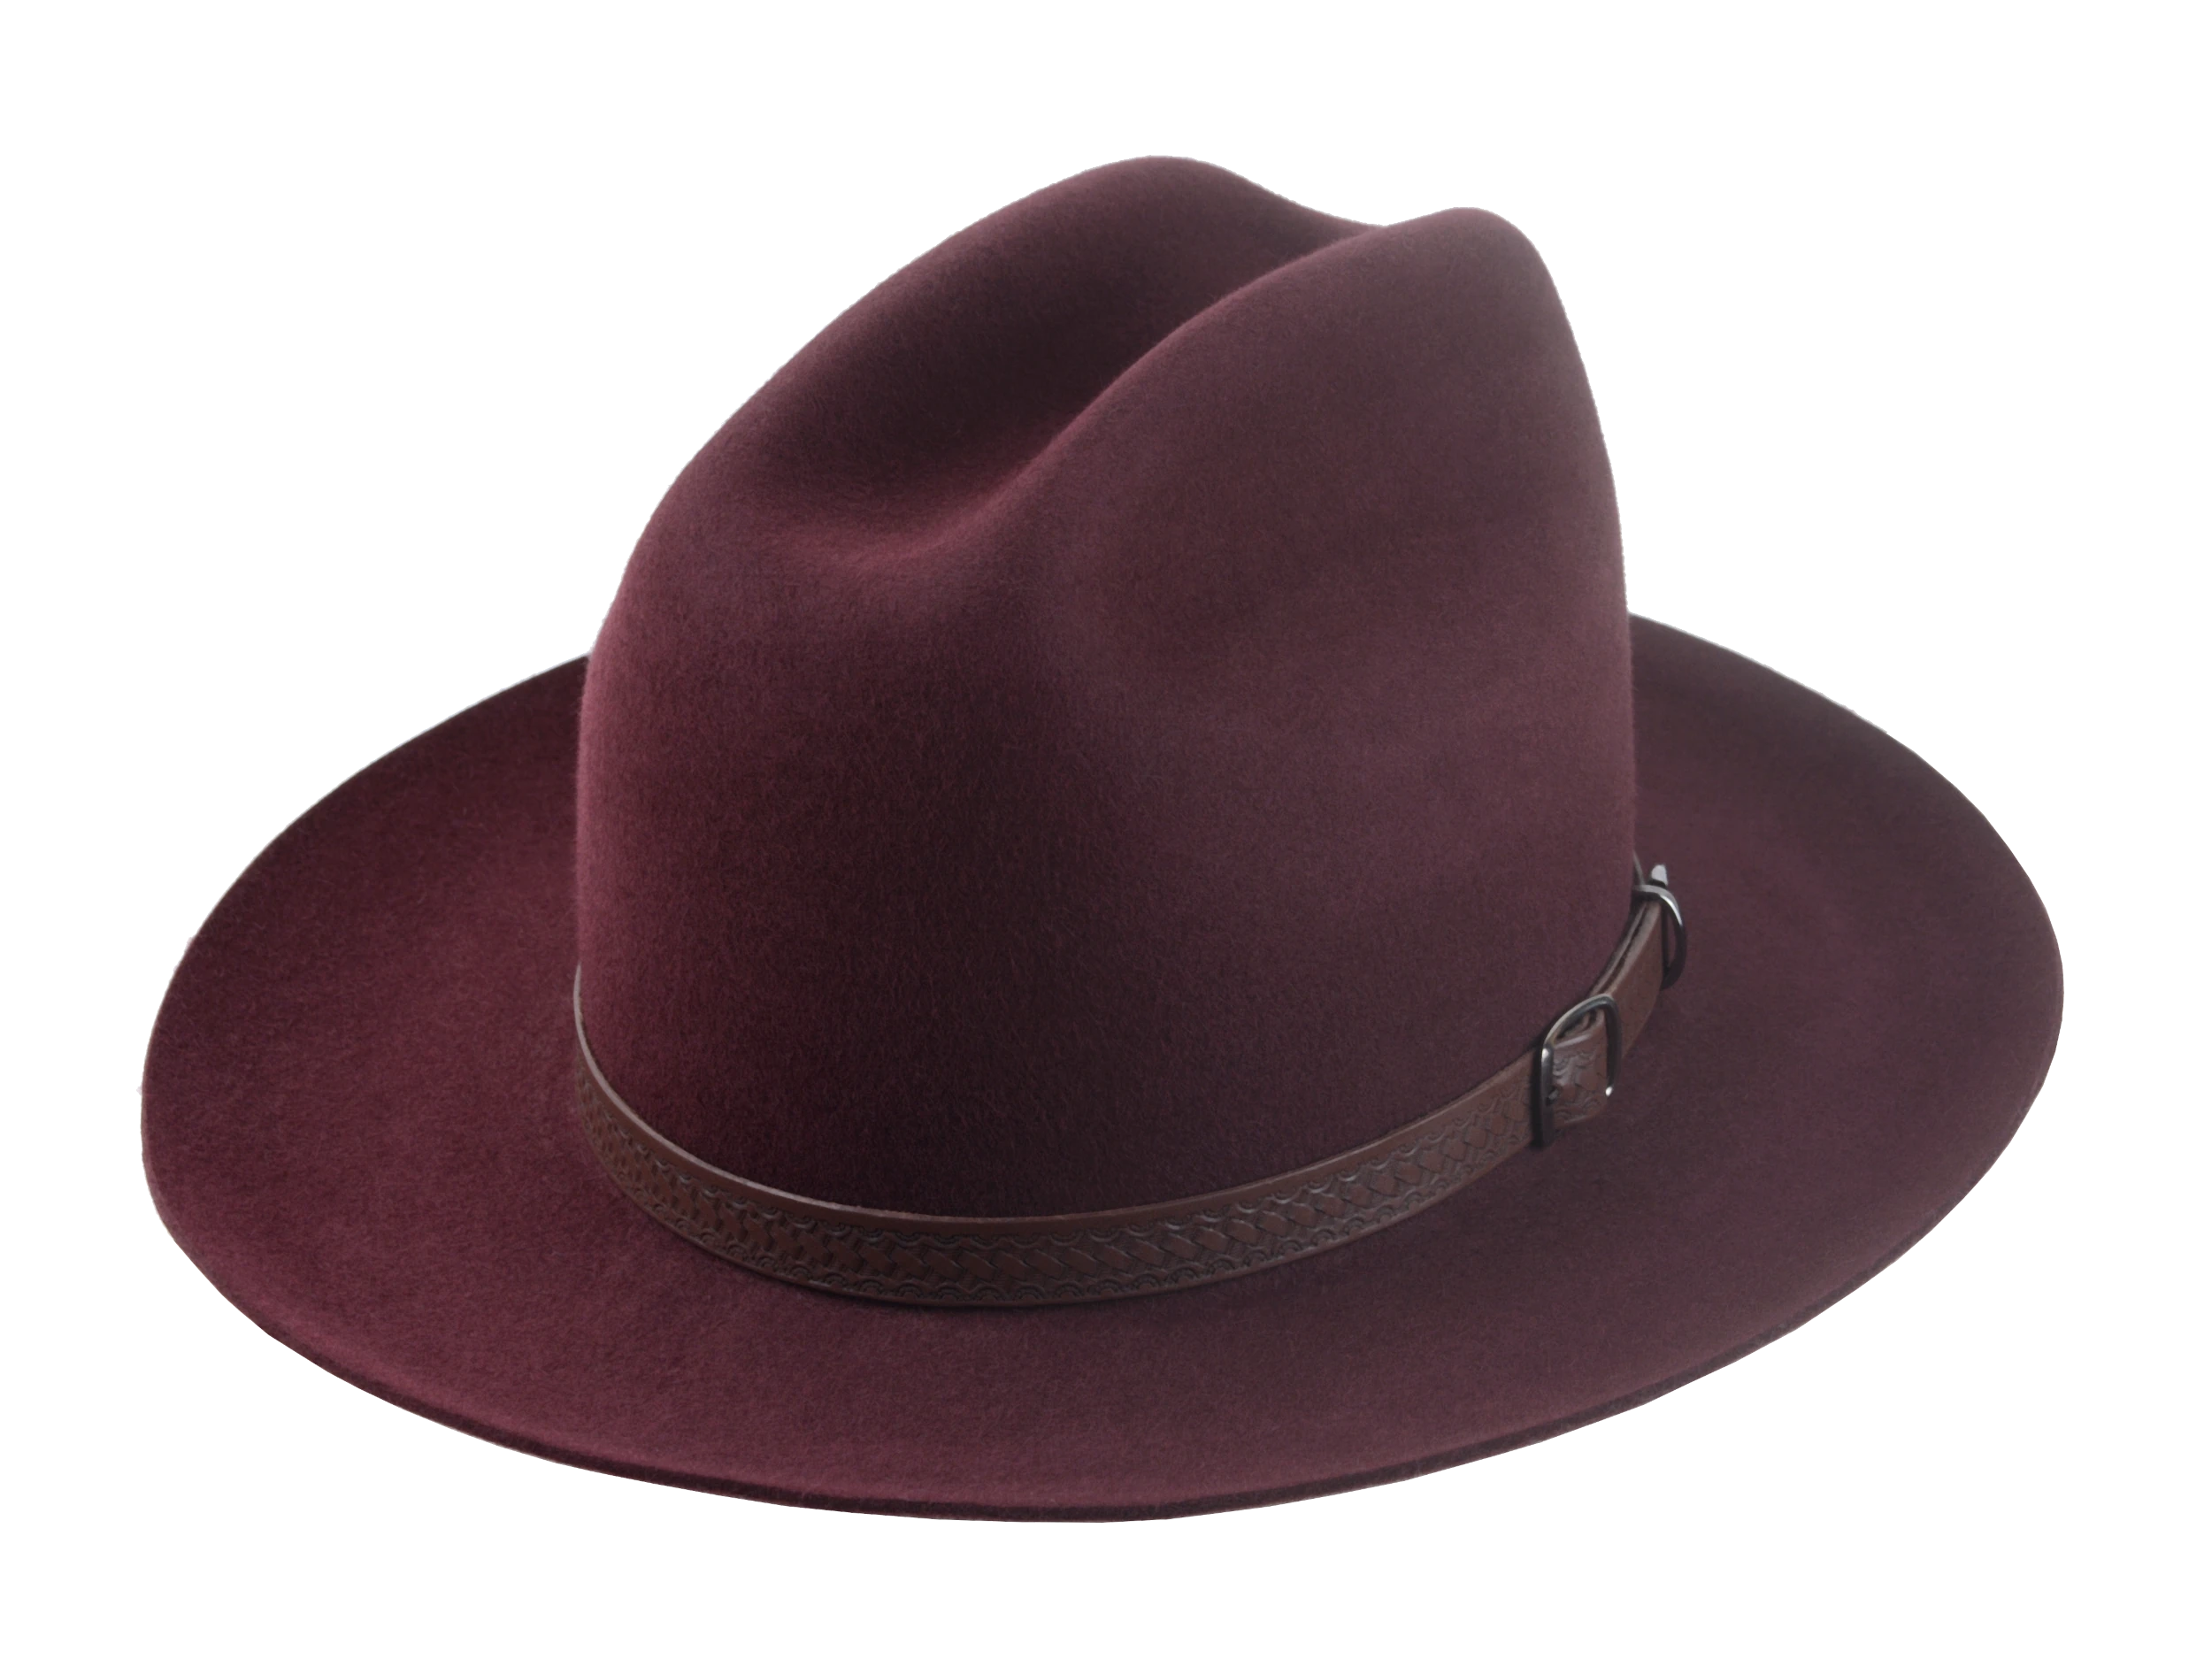 The Patriot: angled view showcasing the smooth burgundy felt and leather hatband | Agnoulita Hats